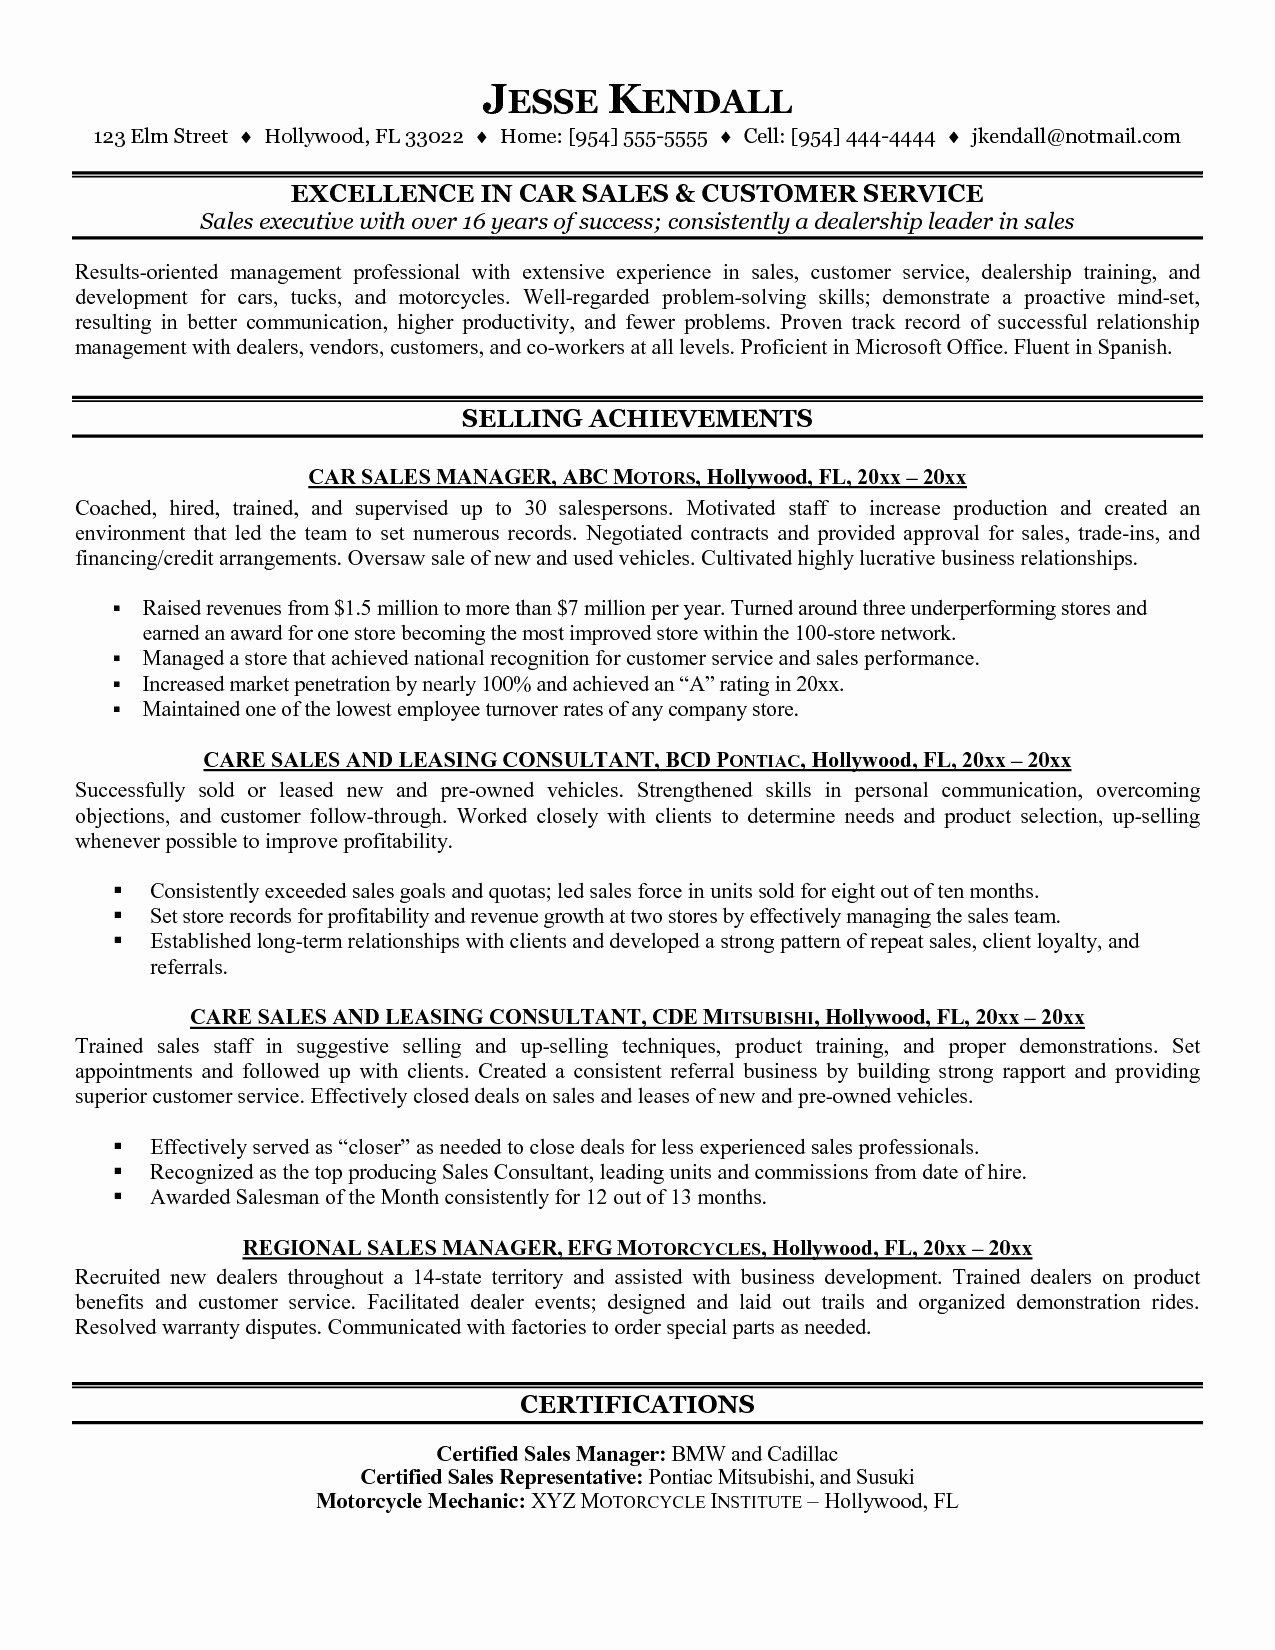 Resume Sample Goal for Auto Parts Salesperson Automobile Sales Manager Resume Unique 9 10 Resume Objective …